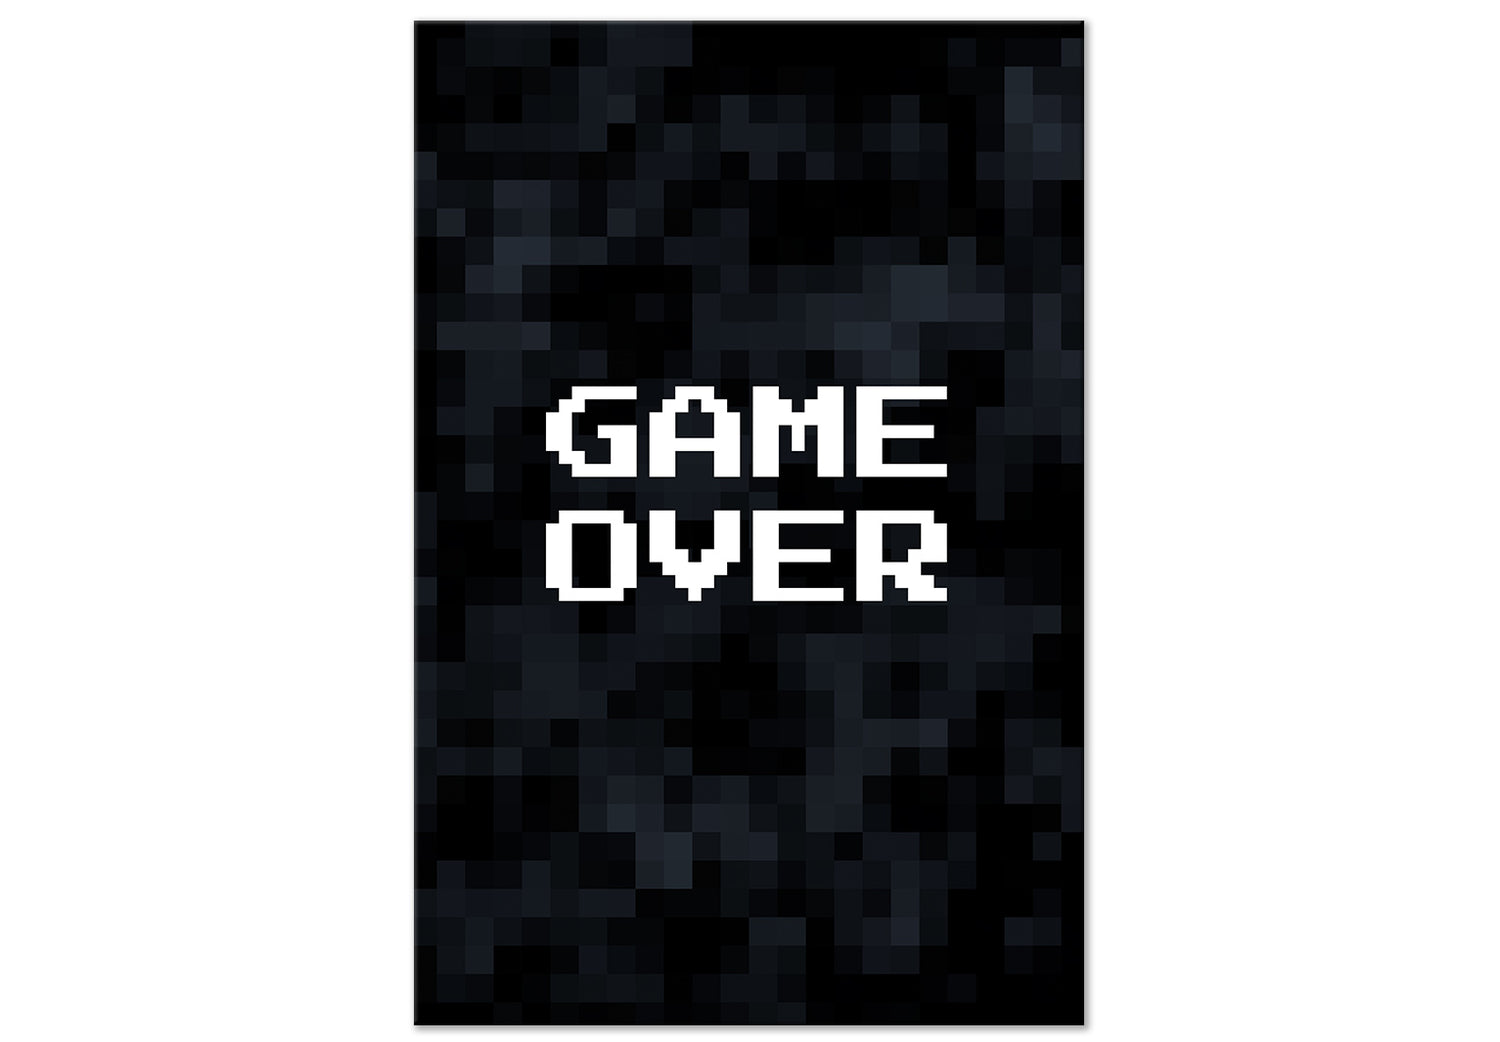 Retro Canvas Wall Art - Pixel Game Over